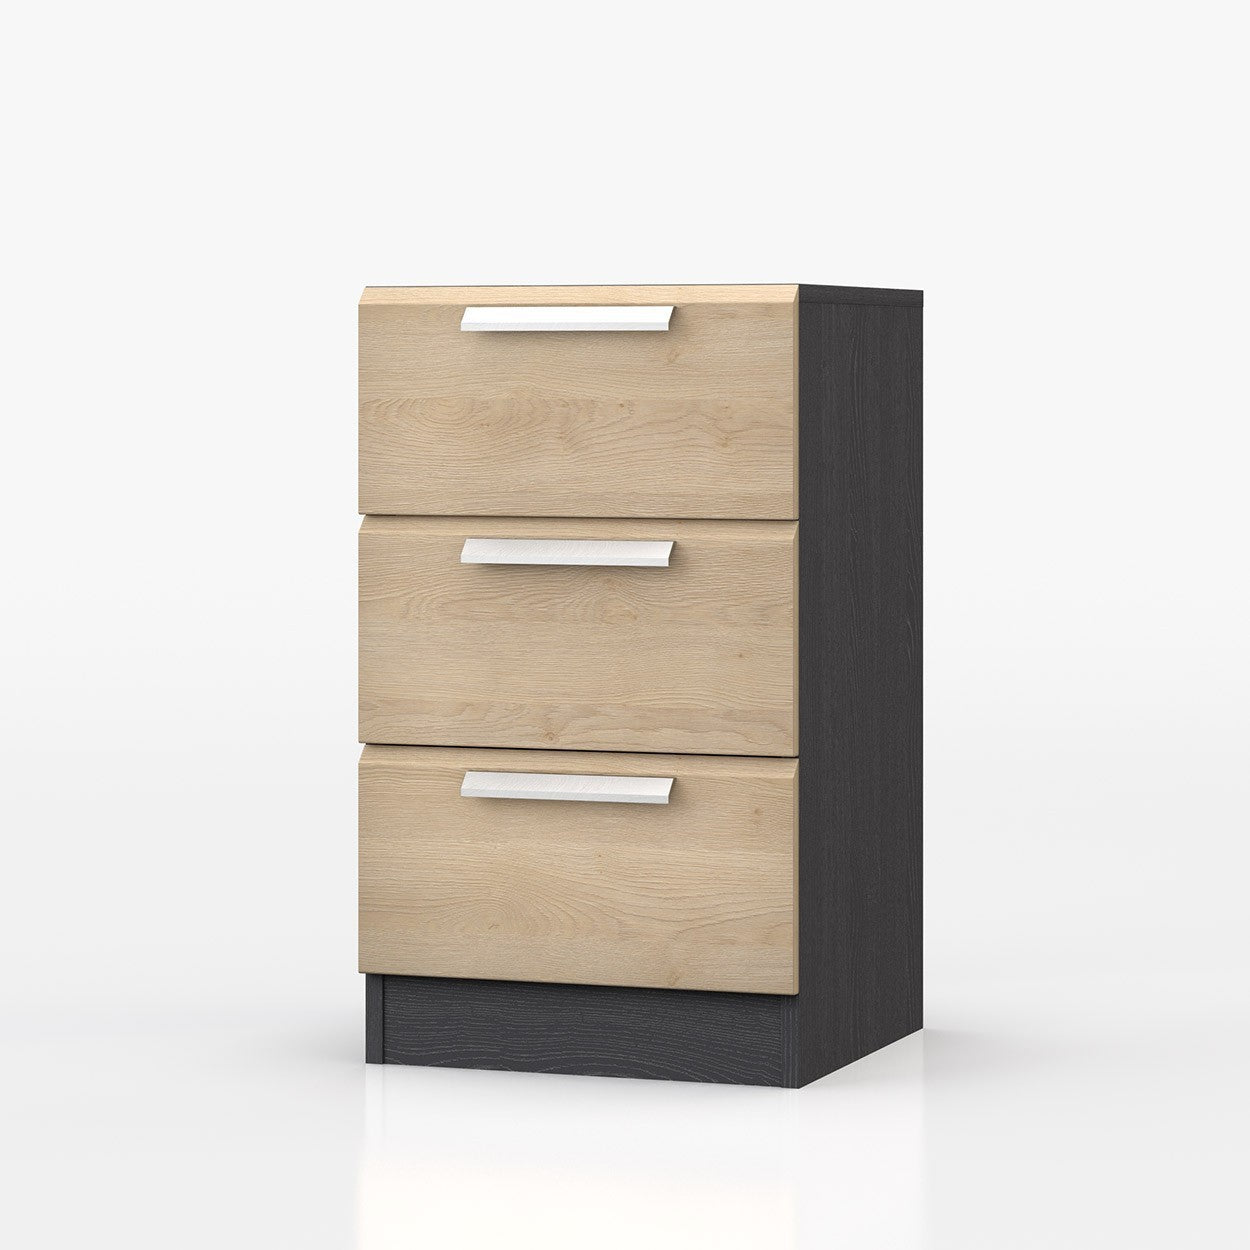 Waterfall 3 Drawer Bedside Graphite and Oak